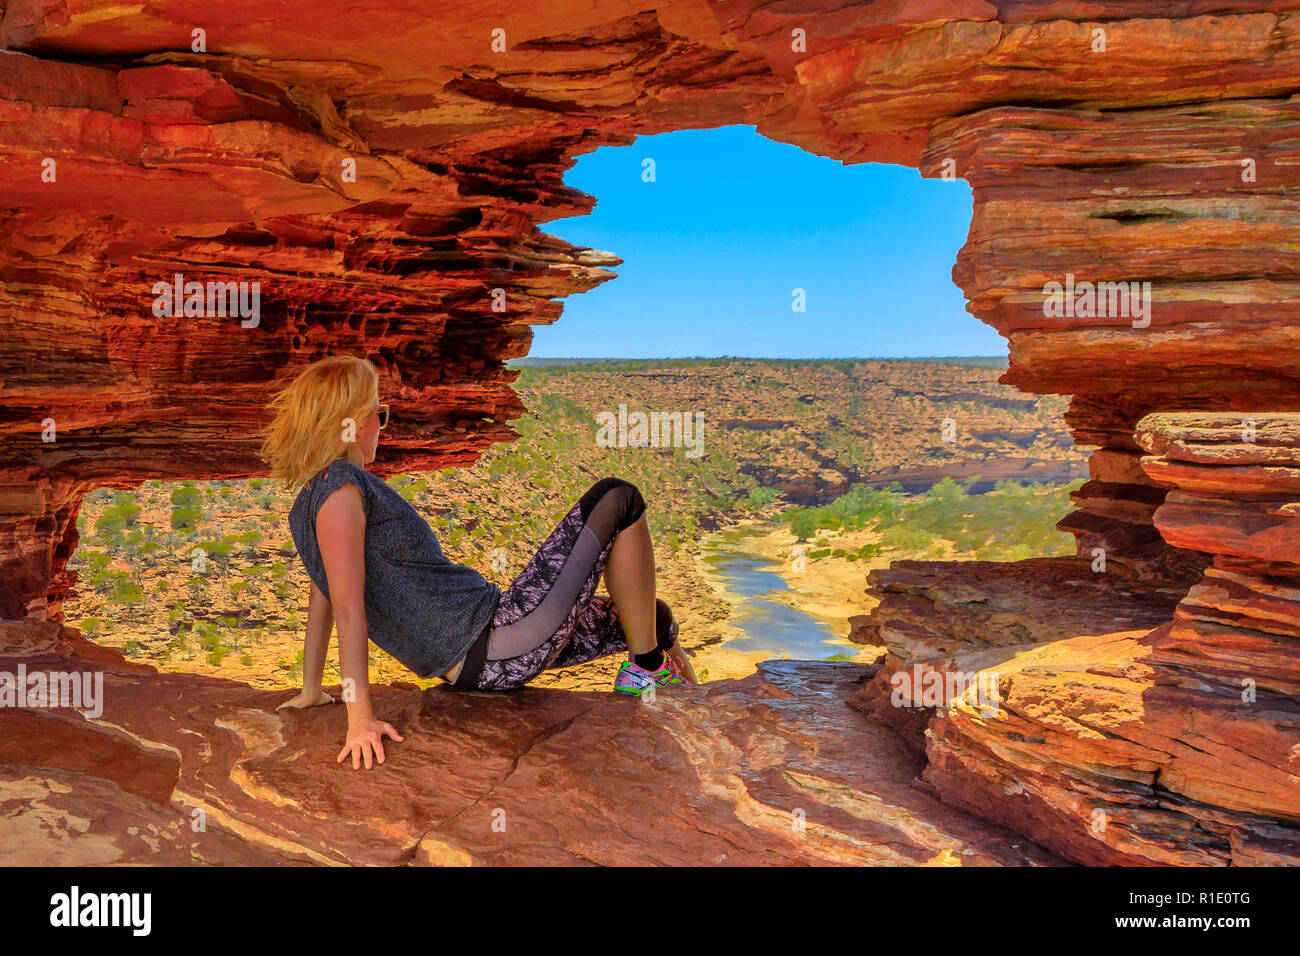 Caucasian woman inside the rock arch in red sandstone of Nature's Window, looking the Murchison River in Kalbarri National Park, Western Australia. Australia travel outback. Stock Photo